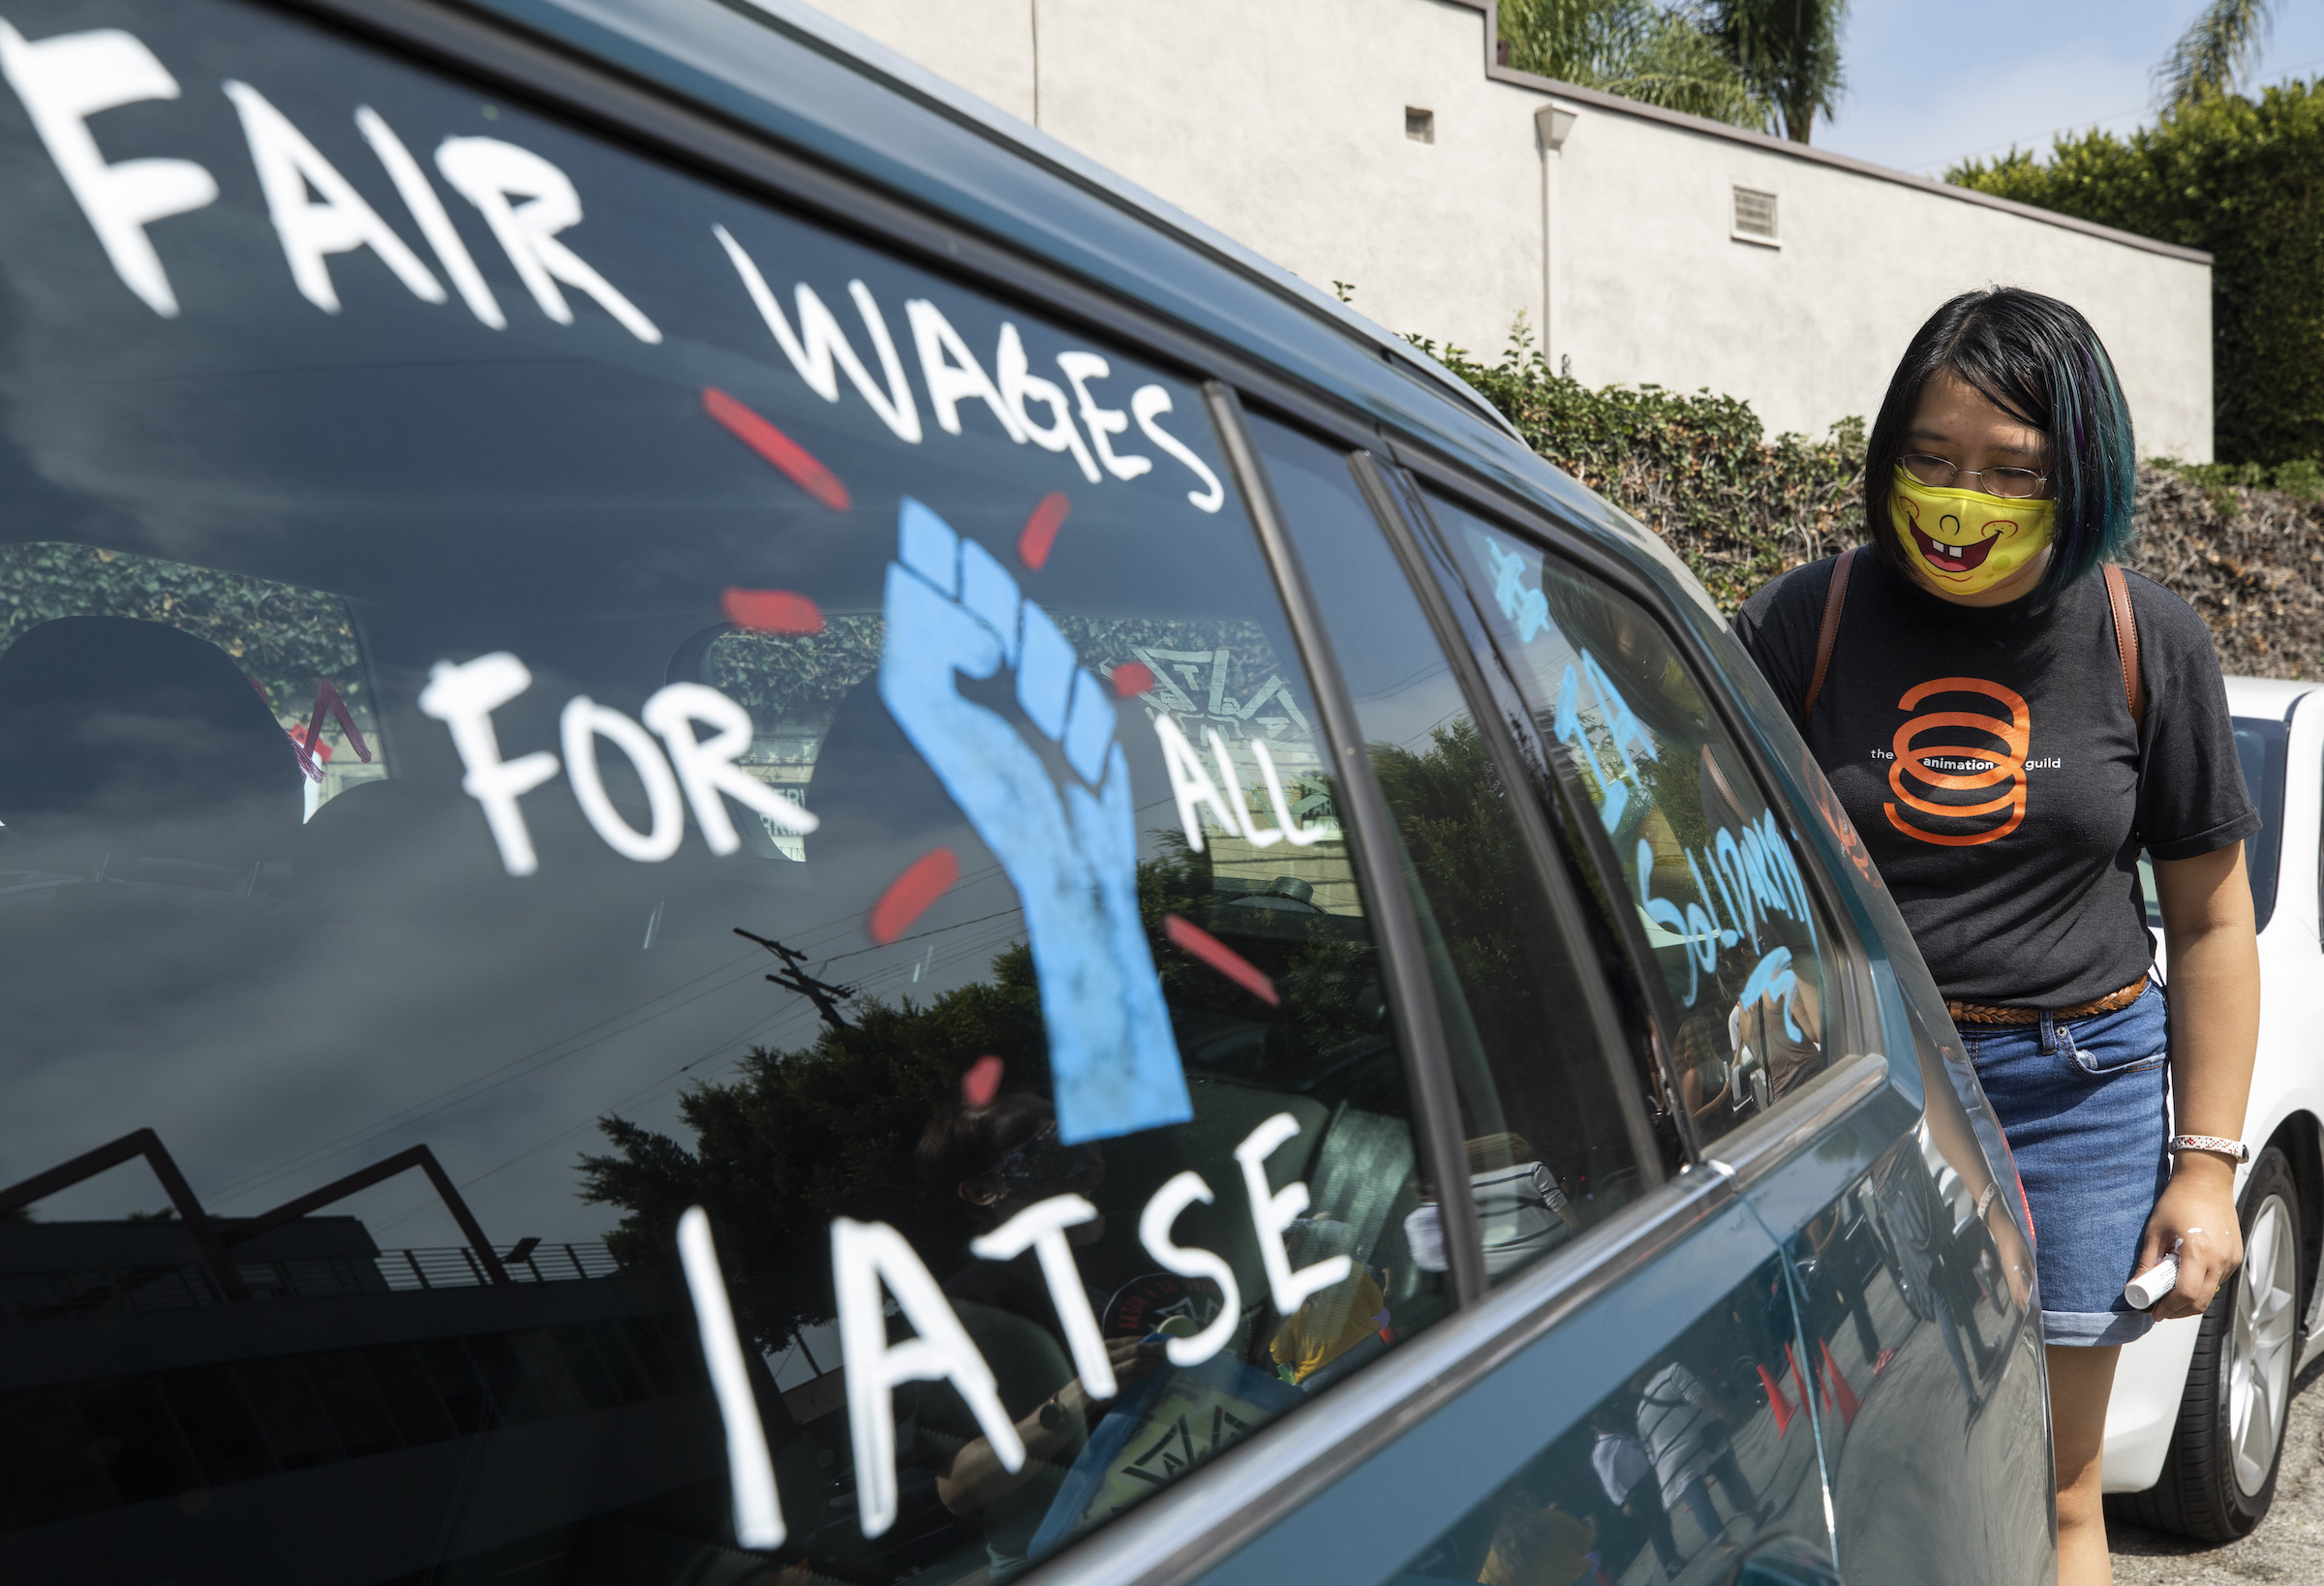 IATSE strike rally in Los Angeles. A Hollywood crew member stands by a car that says 'FAIR WAGES FOR ALL IATSE' and '#IASOLIDARITY' in the windows.